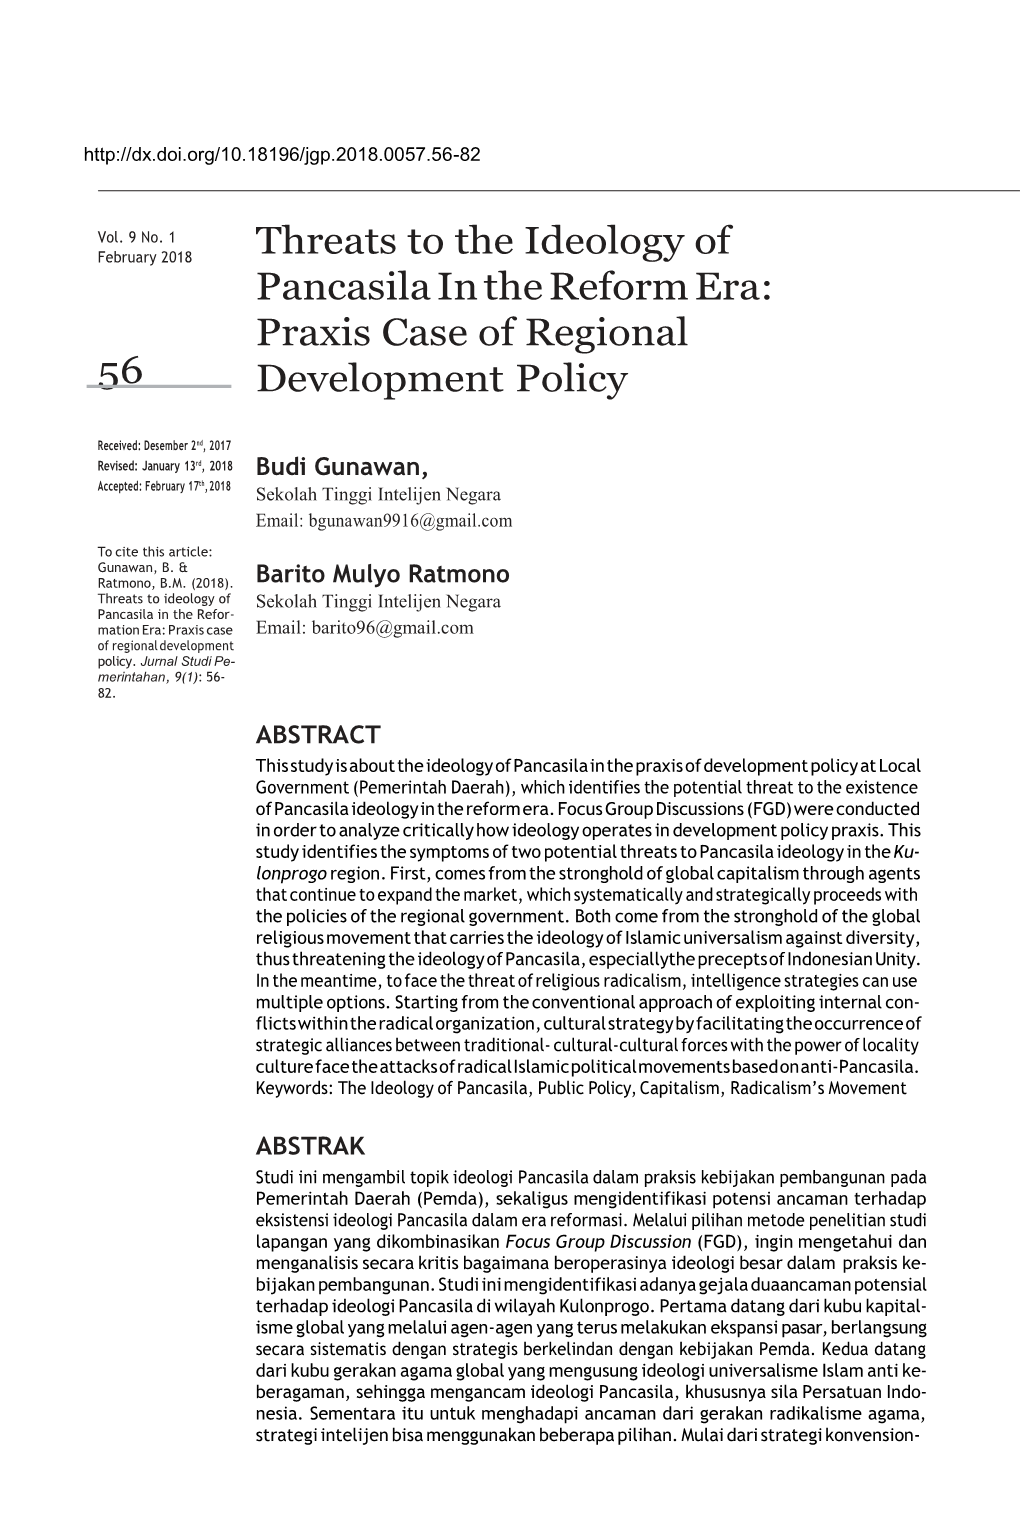 Threats to the Ideology of Pancasila in the Reform